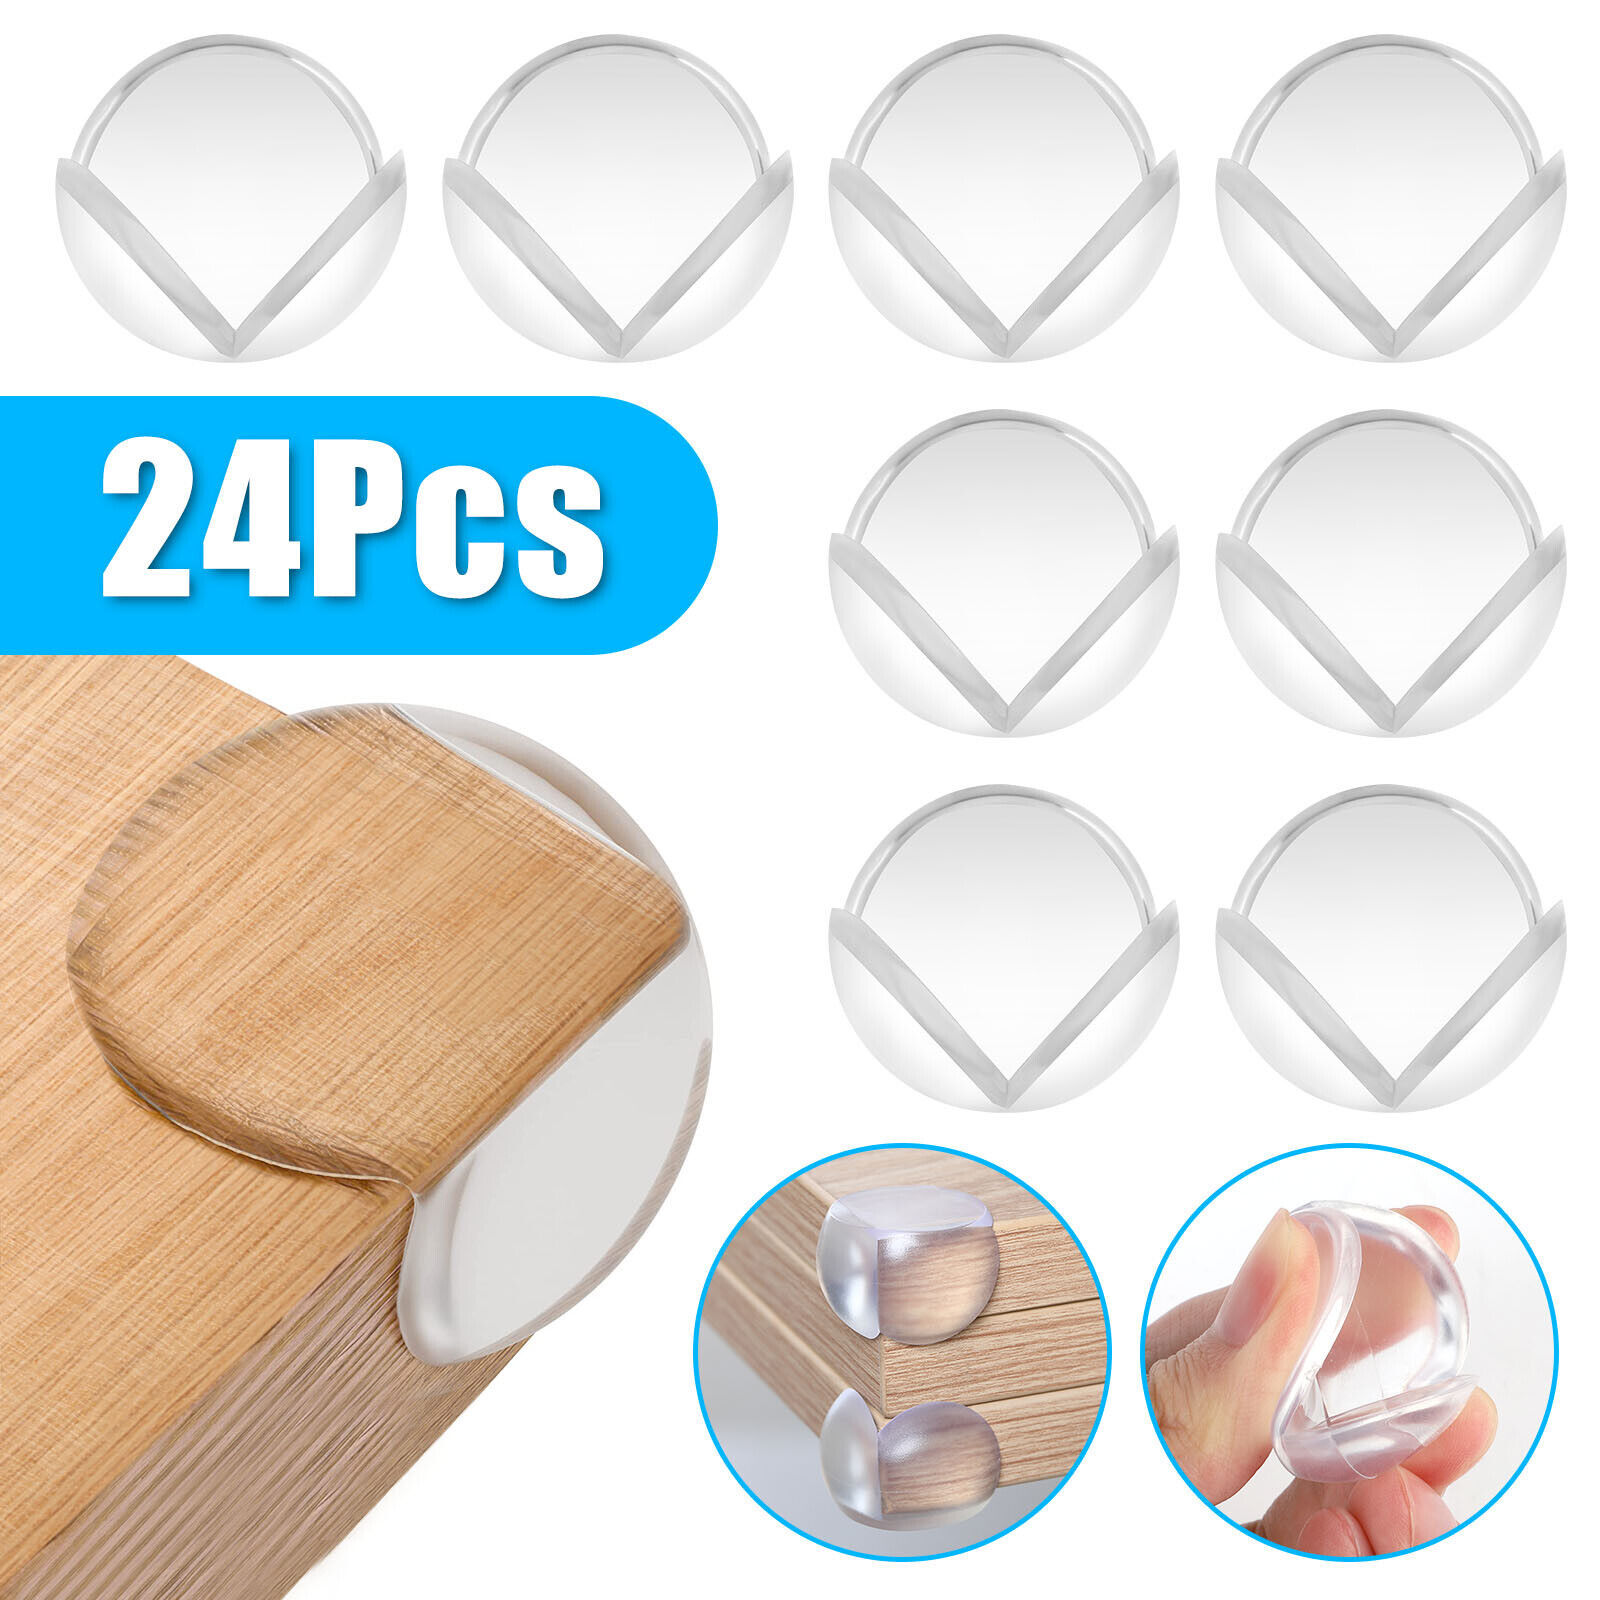 24Pcs Table Corner Edge Protector Round Cushion Cover Sticker Baby Safety Bumper - $18.99